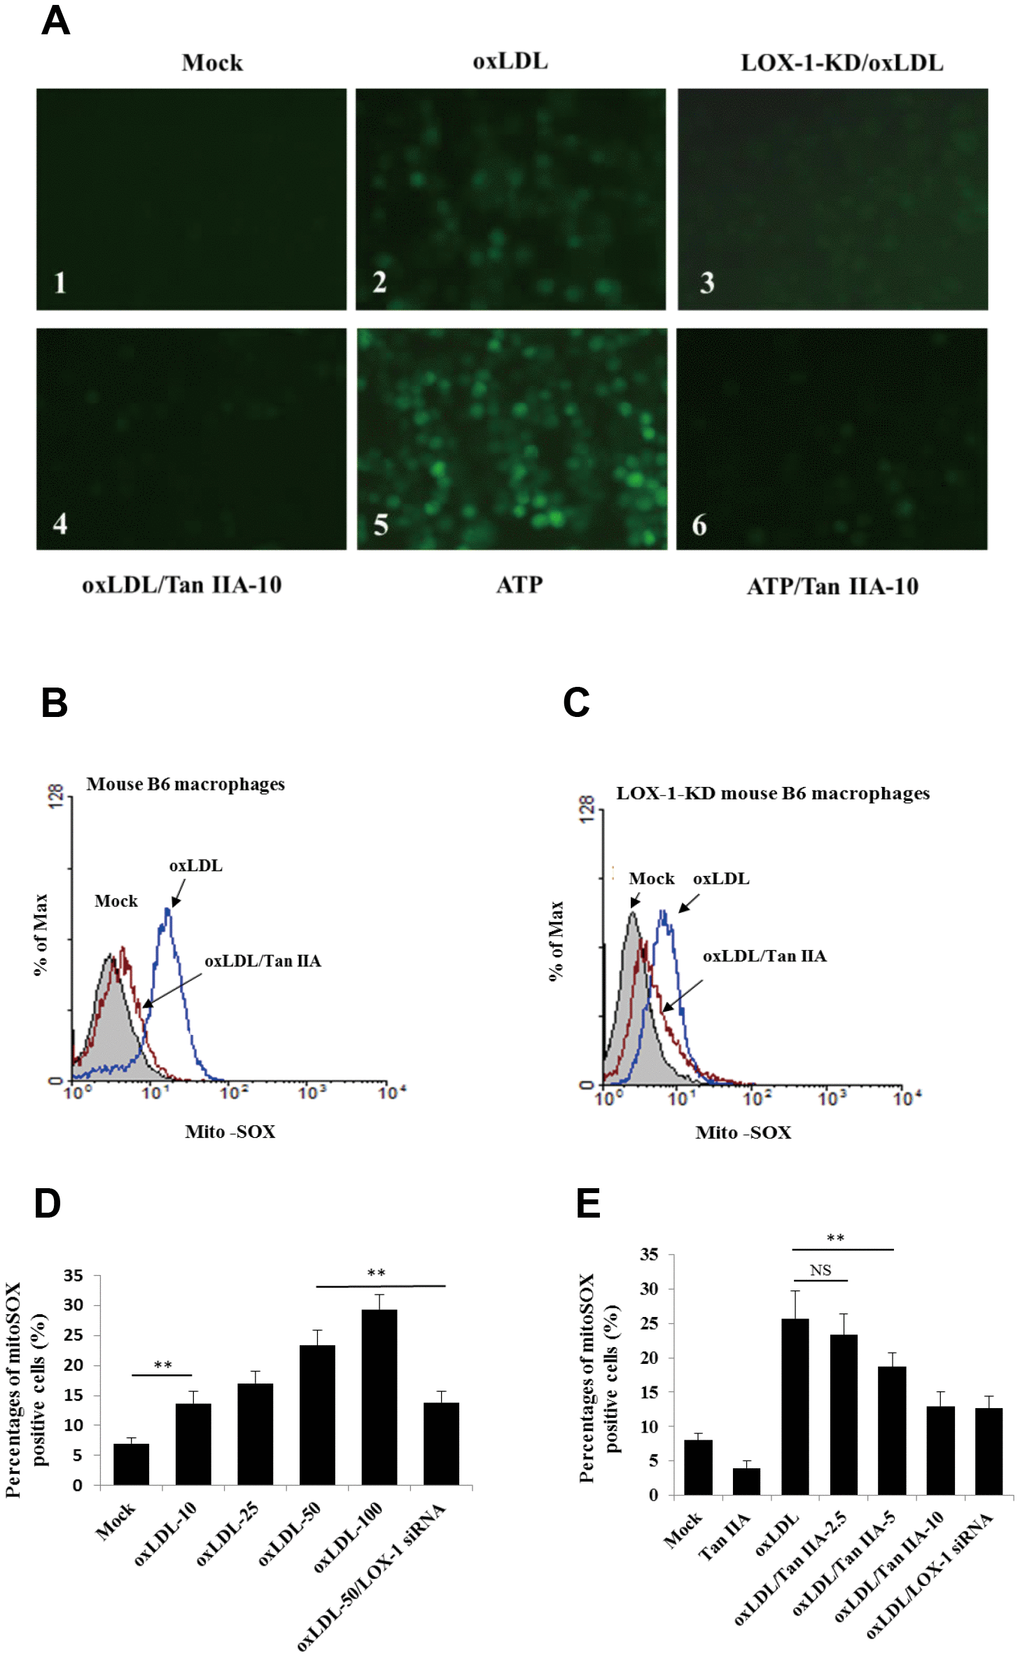 Tan IIA inhibits oxLDL-induced LOX-1-mediated ROS production and mitochondrial damage in macrophages. (A) Oxidized LDL induction and Tan IIA inhibition on ROS generation detected using ROS fluorescence detector DCFH-DA (ATP treatment as a positive control). (B, C) Oxidized LDL induction and Tan IIA inhibition on mito-ROS production detected with MitoSOX (Invitrogen) using a flow cytometer in mouse B6 macrophages and LOX-1-KD B6 macrophages, respectively. (D) Mito-ROS production in the B6 macrophages induced by oxLDL at the different doses (0, 10, 25, 50, 100 μg/mL).